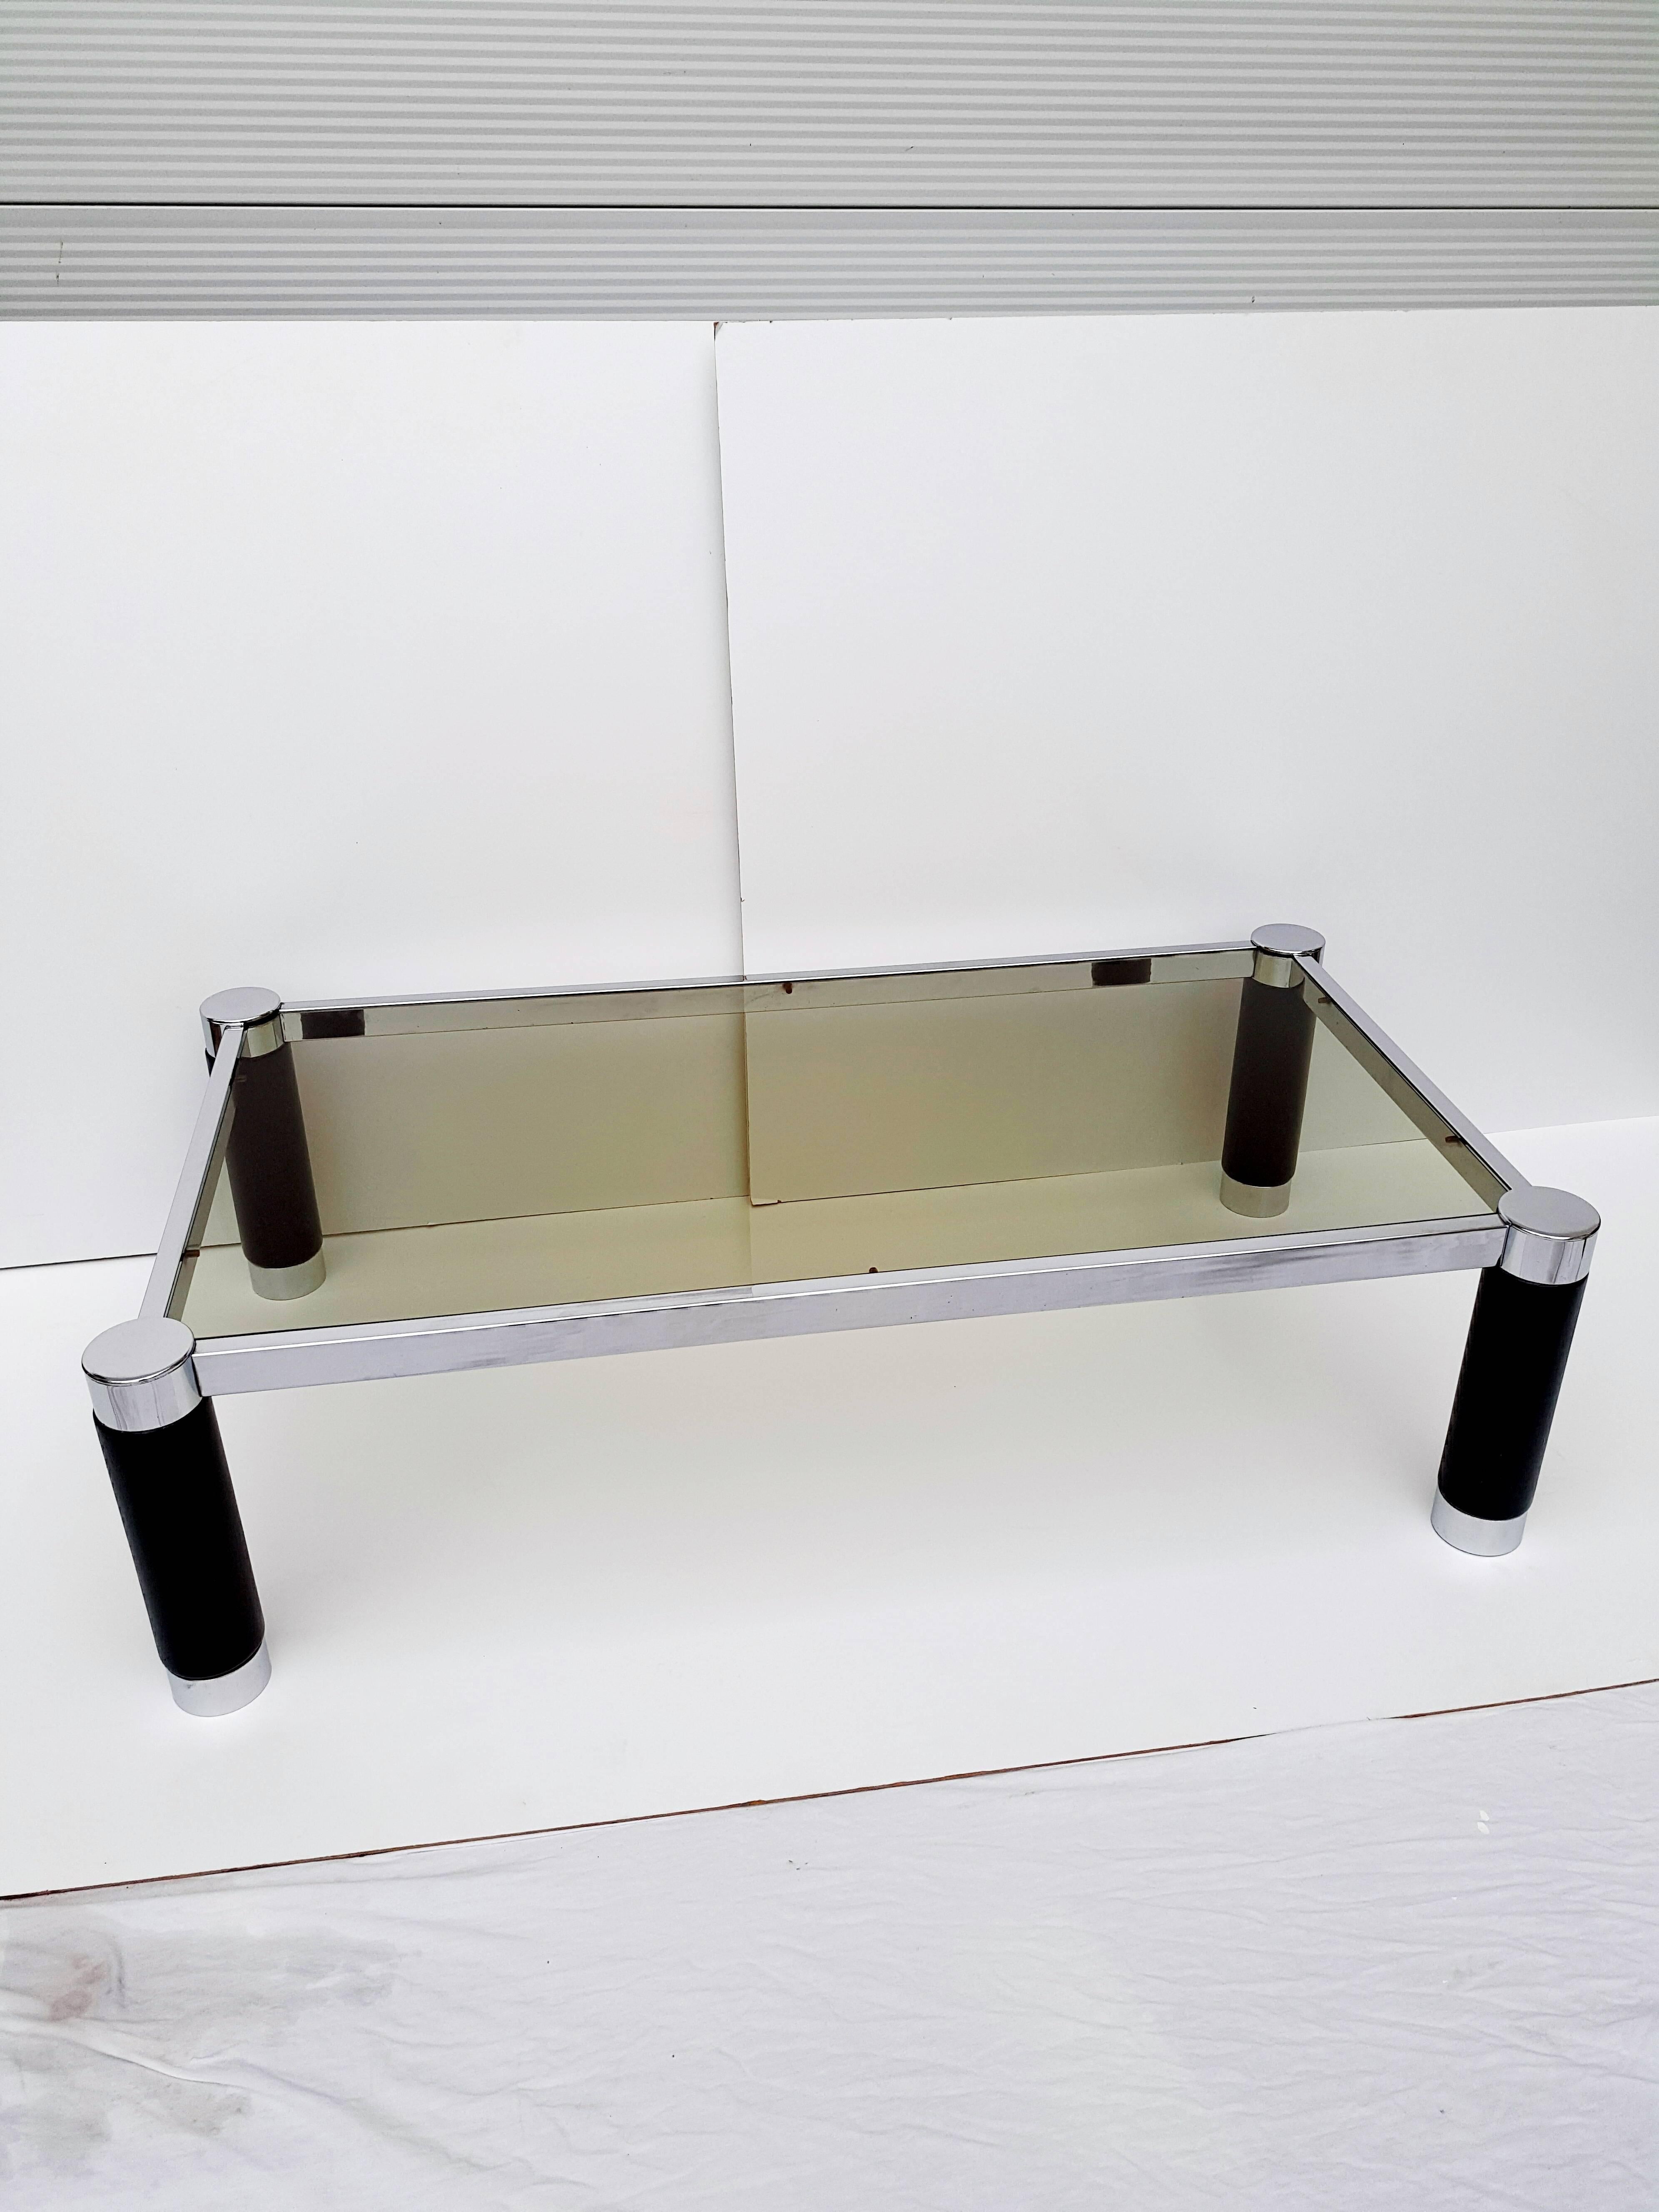 This coffee table by Roche Bobois is produced in France during the 1970s.
Rectangular with four large chrome and black lacquered wood leg and a dark smoked glass top. 
In excellent vintage condition.